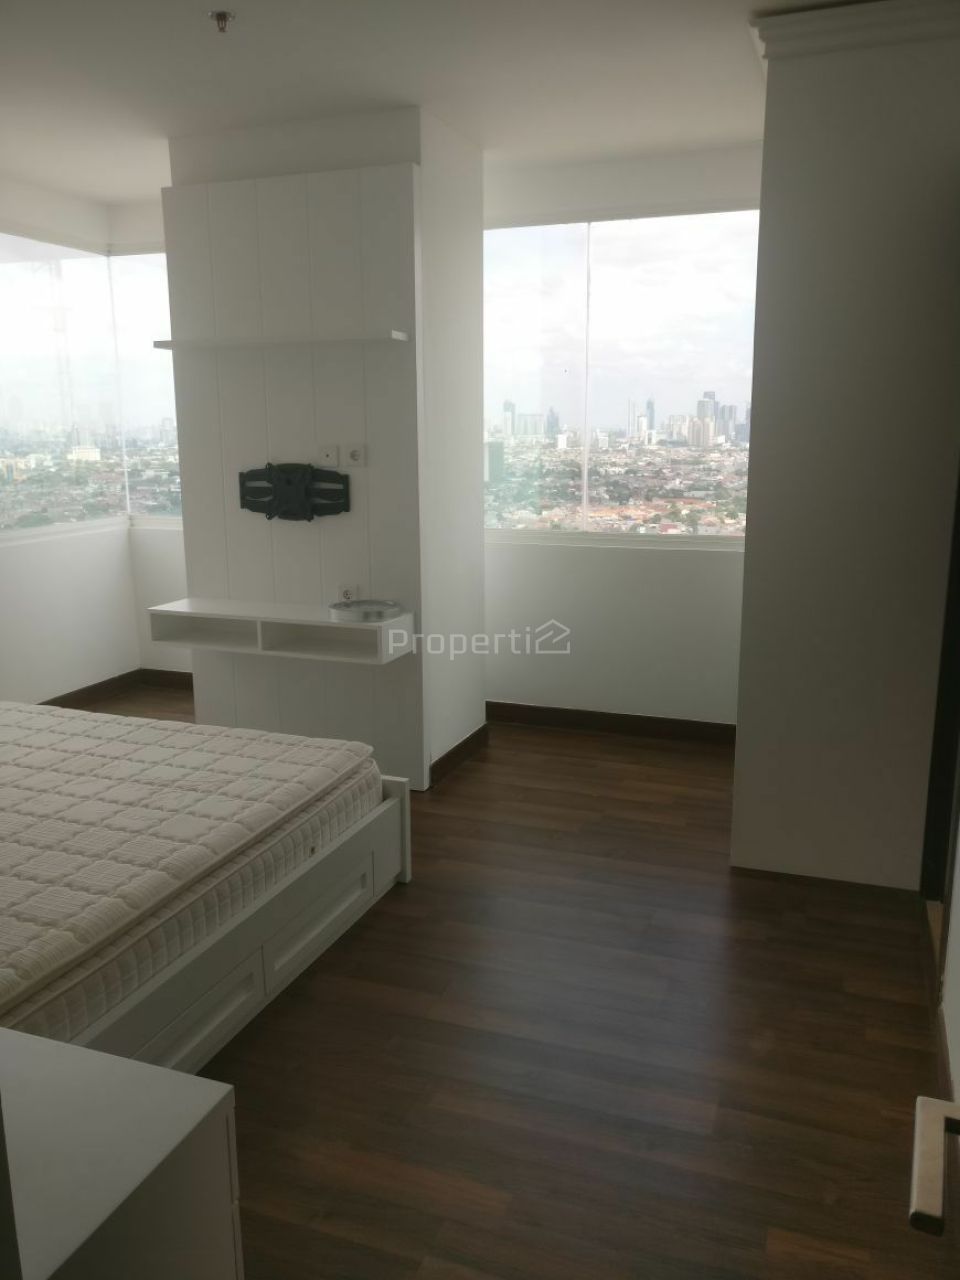 New Apartment Unit at Gallery West Residences, 26th Floor, Jakarta Barat